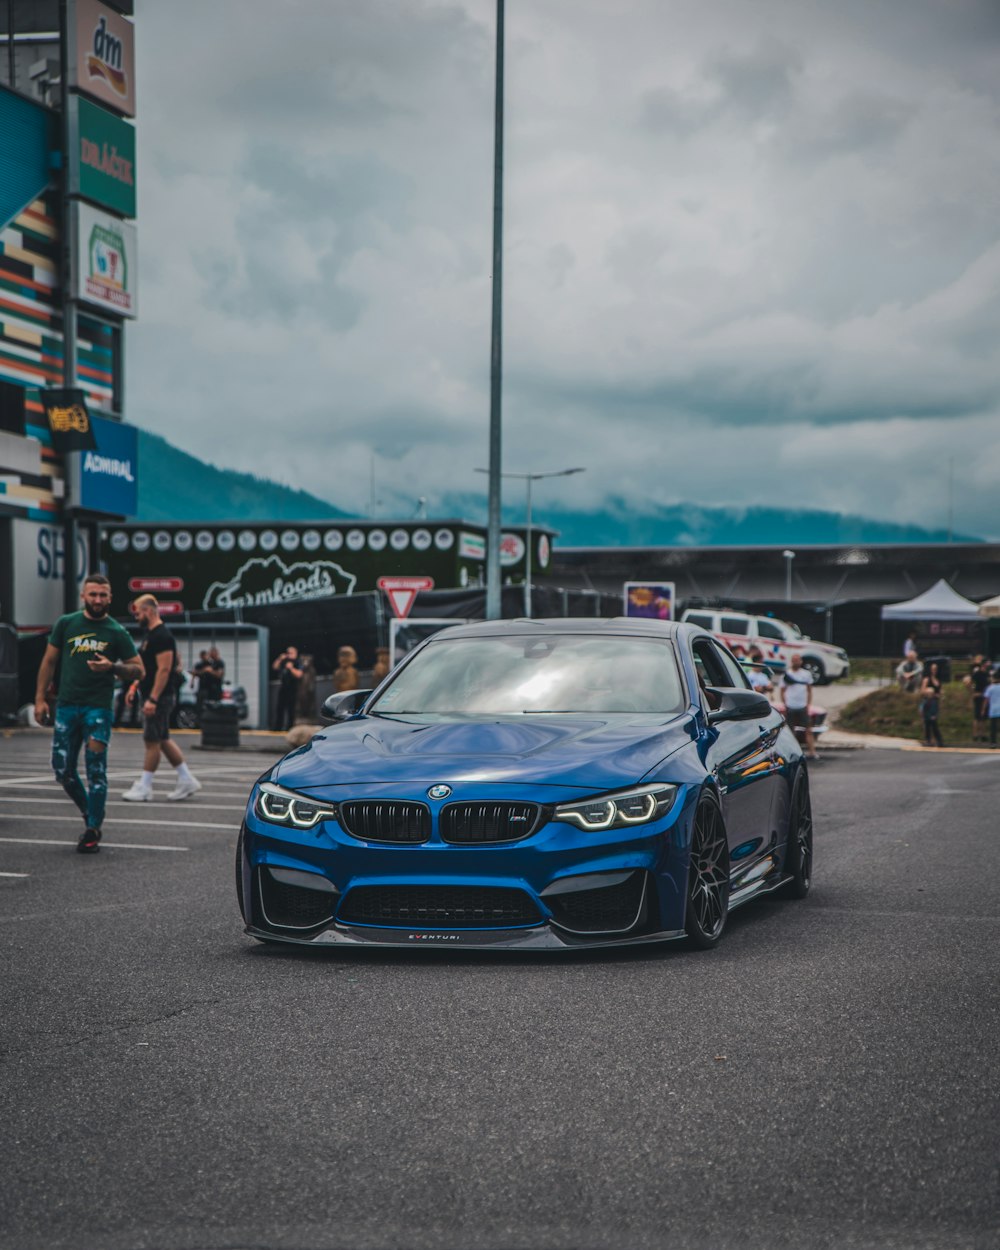 a blue bmw car parked in a parking lot